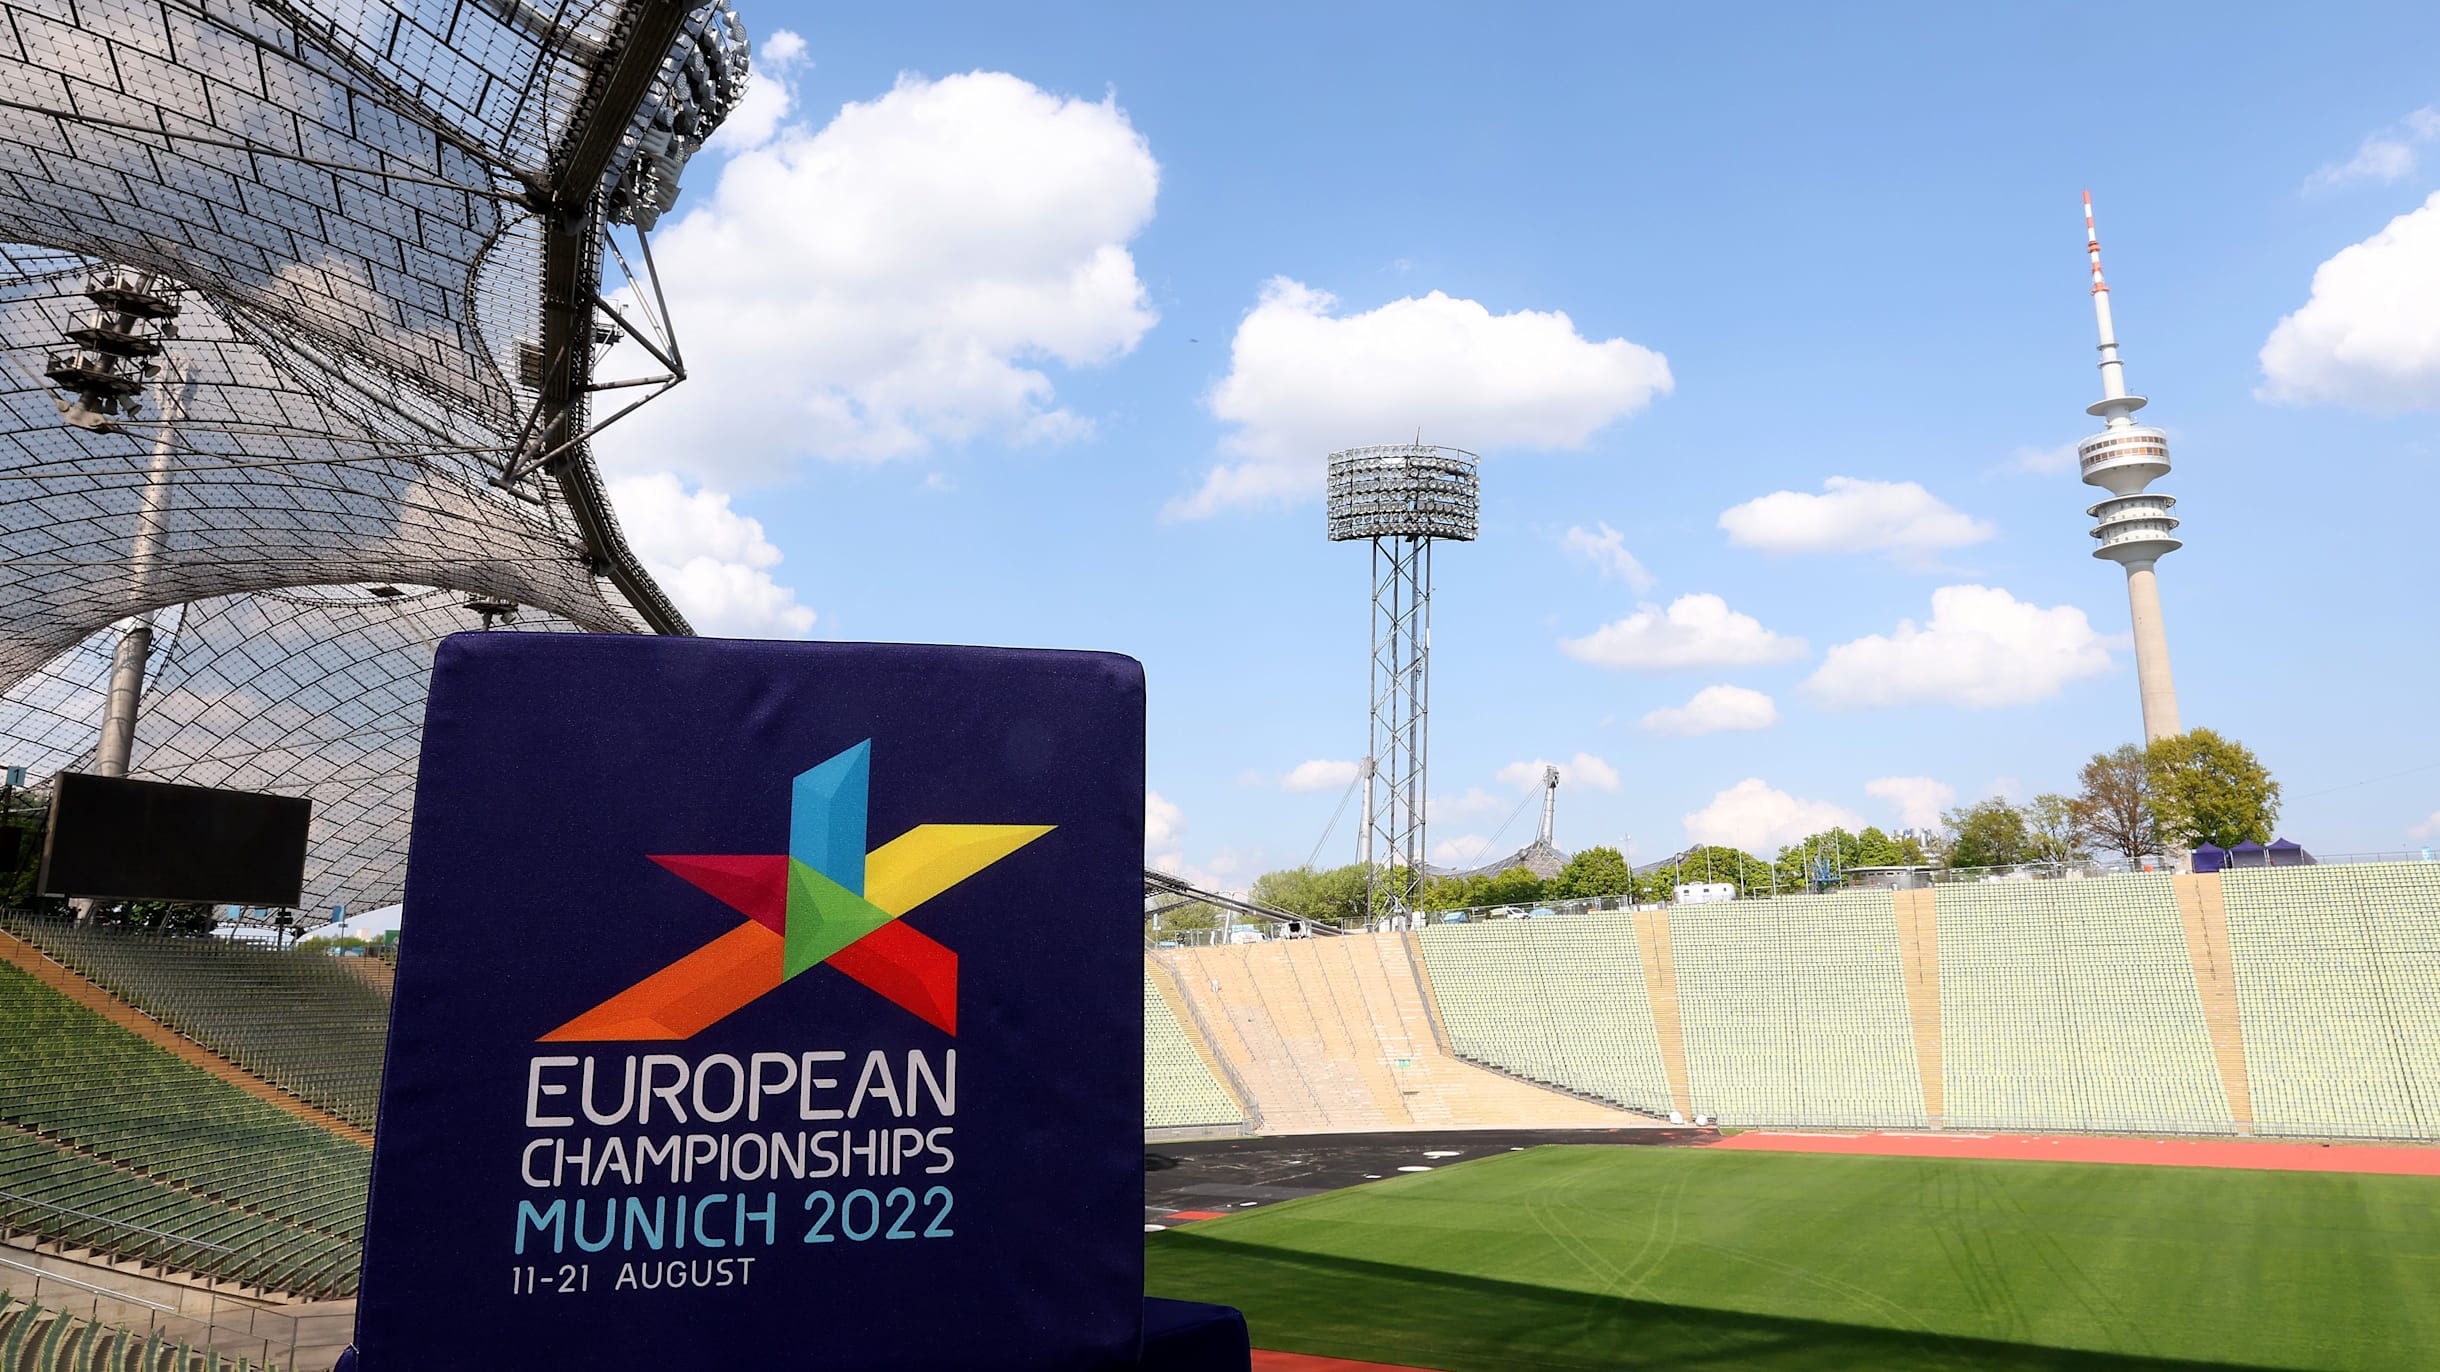 European Championships Munich 2022 Preview, schedule, how to watch stars compete in athletics, cycling, gymnastics, canoe, rowing, climbing, triathlon, and more